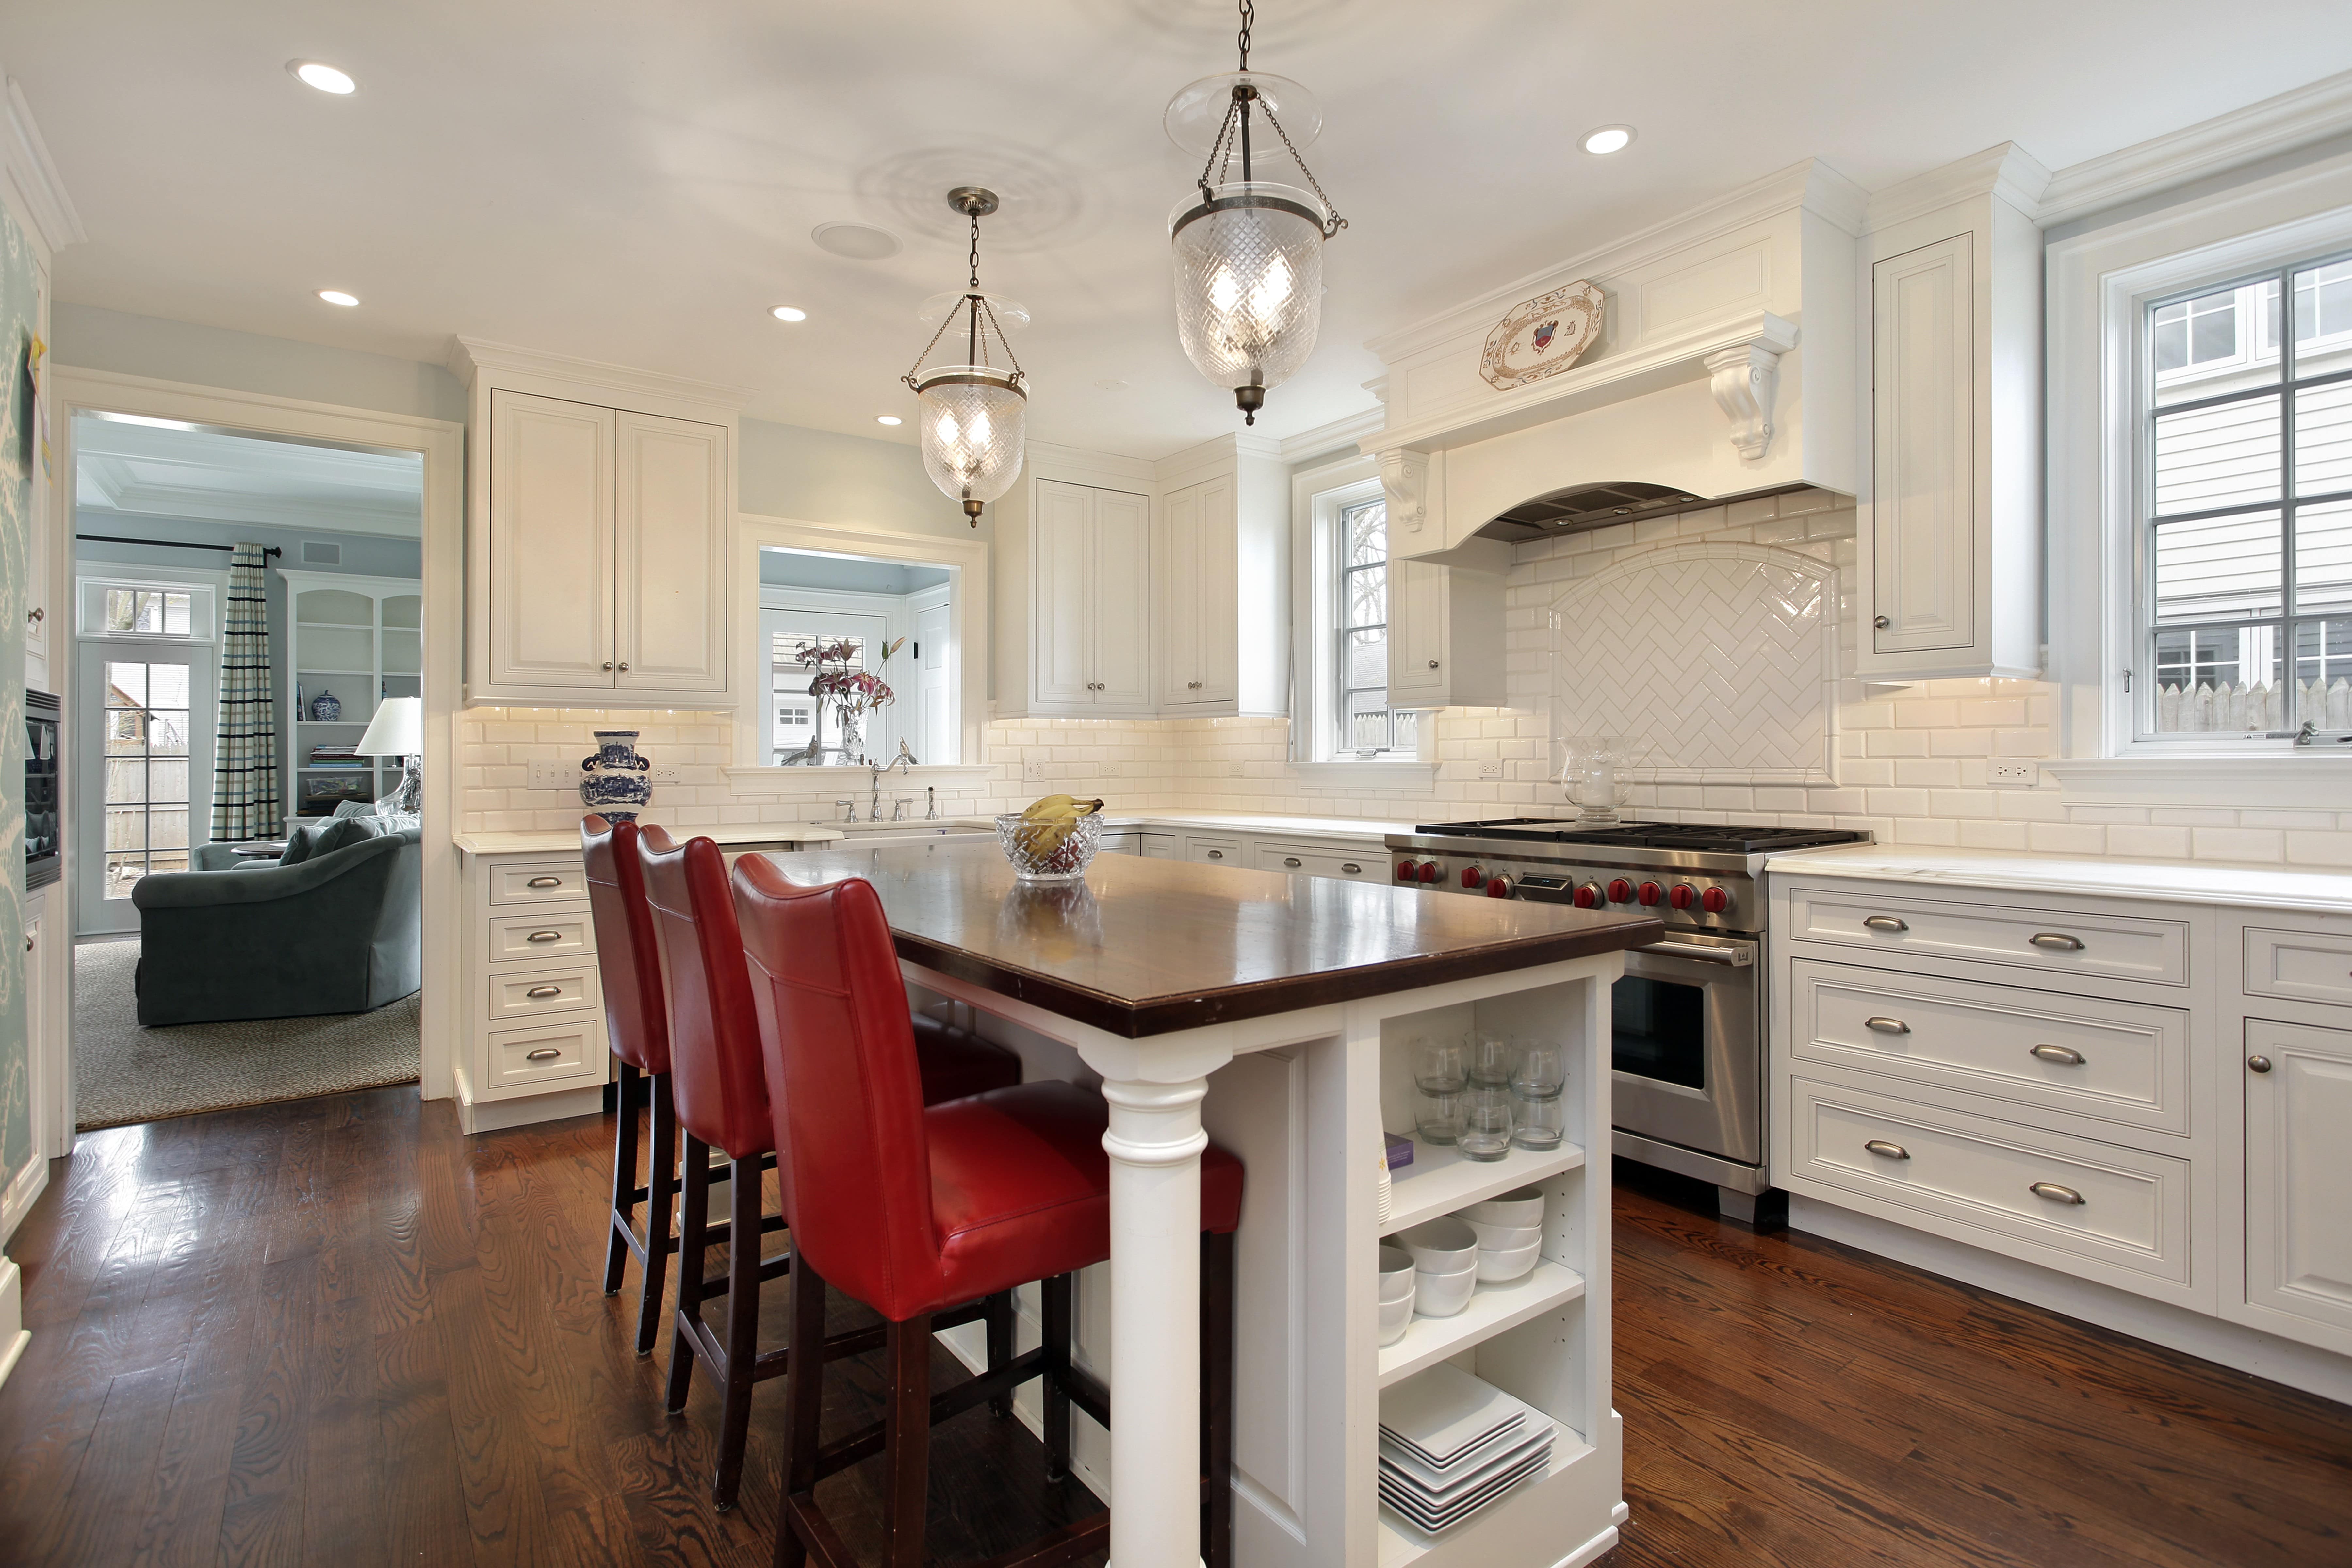 CUSTOM KITCHEN CABINETS
MANY DESIGNS AND STYLES
CUSTOM FINISHING COLORS
KITCHEN REMODELING